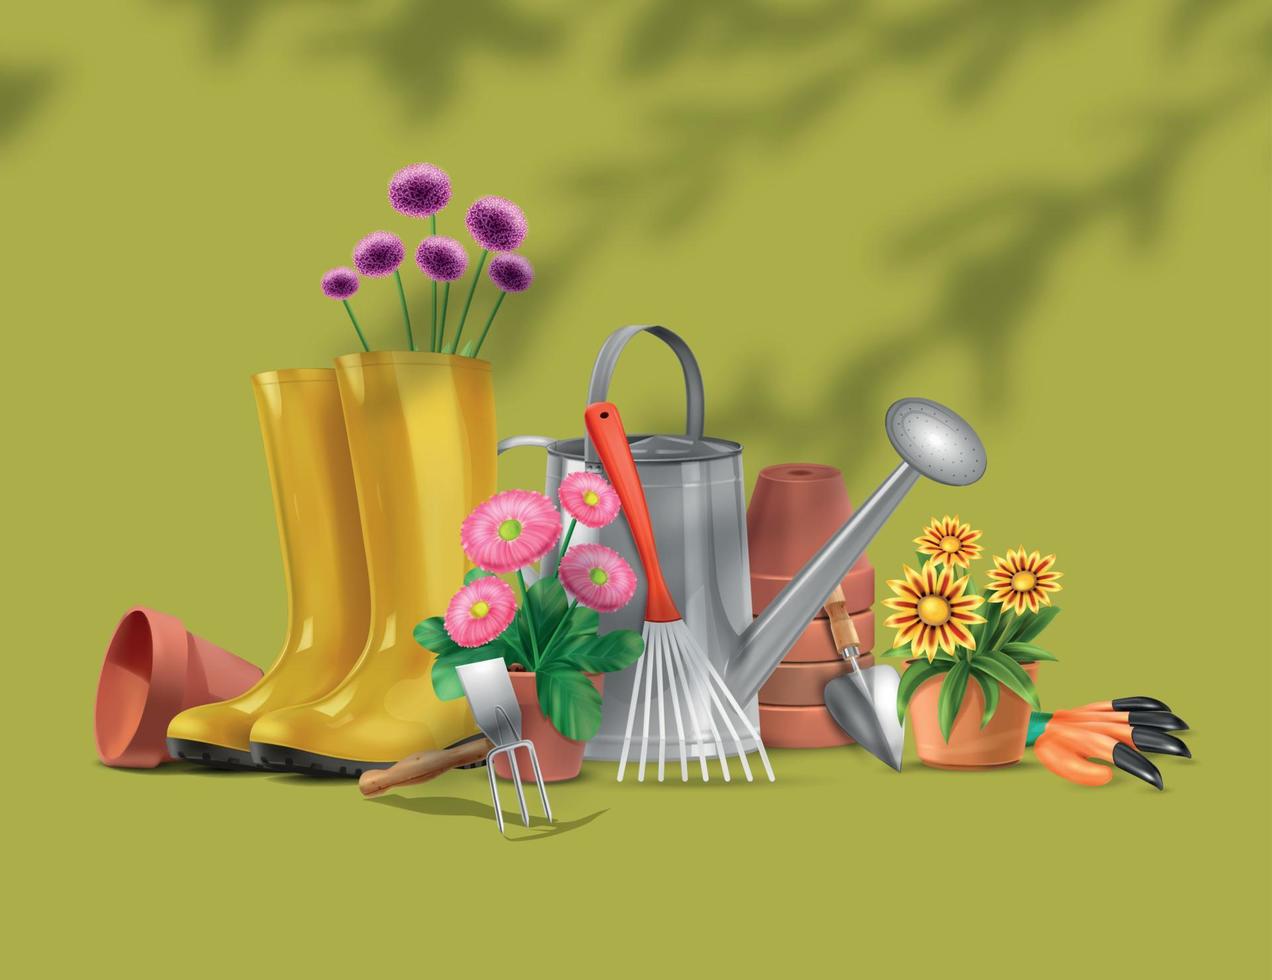 Realistic Gardening Tools Composition vector